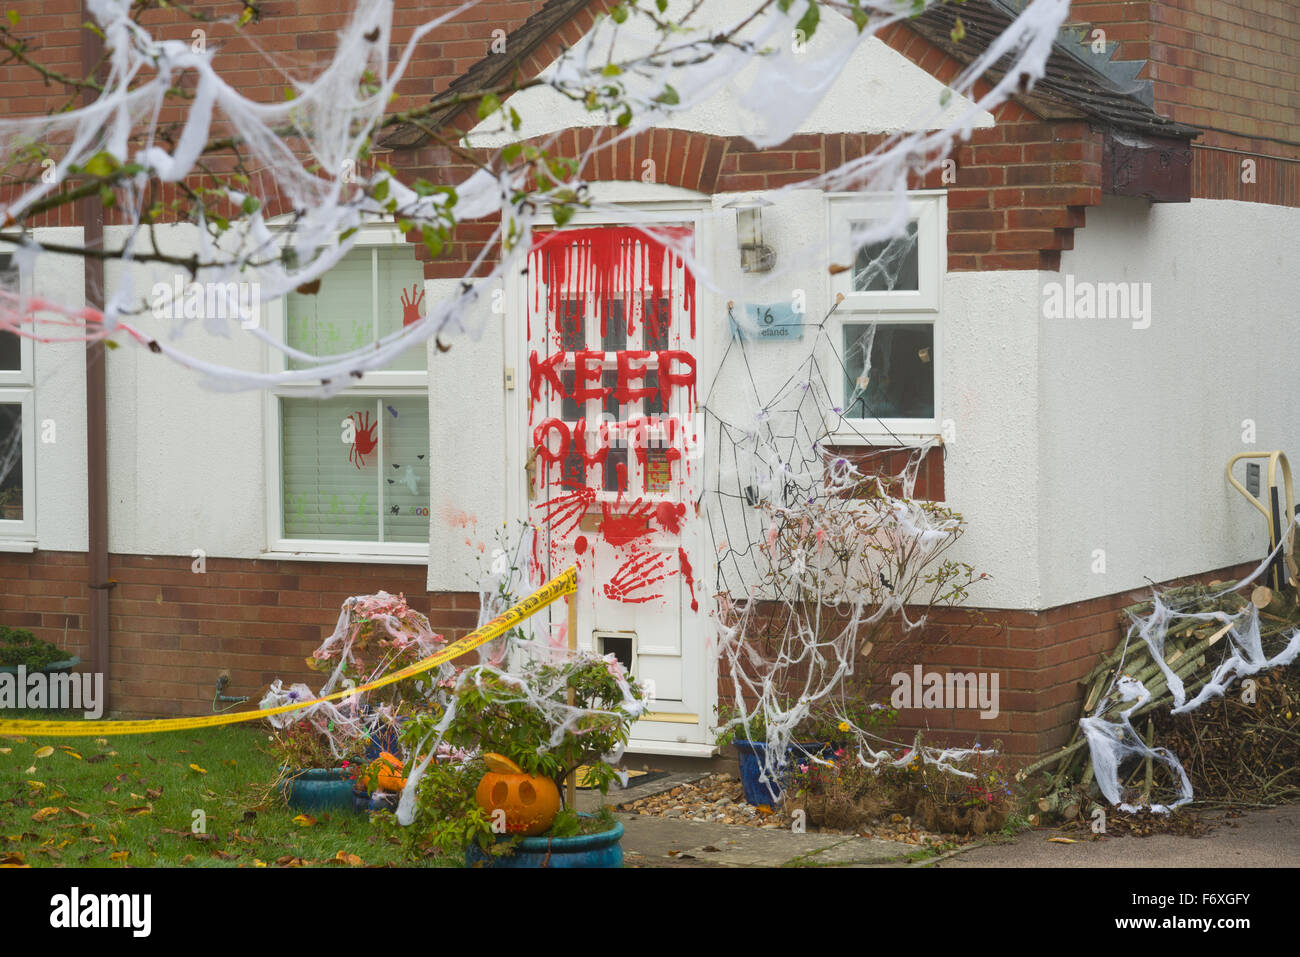 Halloween decorated house with the words 'Keep Out' in red on the front door. Pumpkins and fake spiders web and skeletal hands. Stock Photo